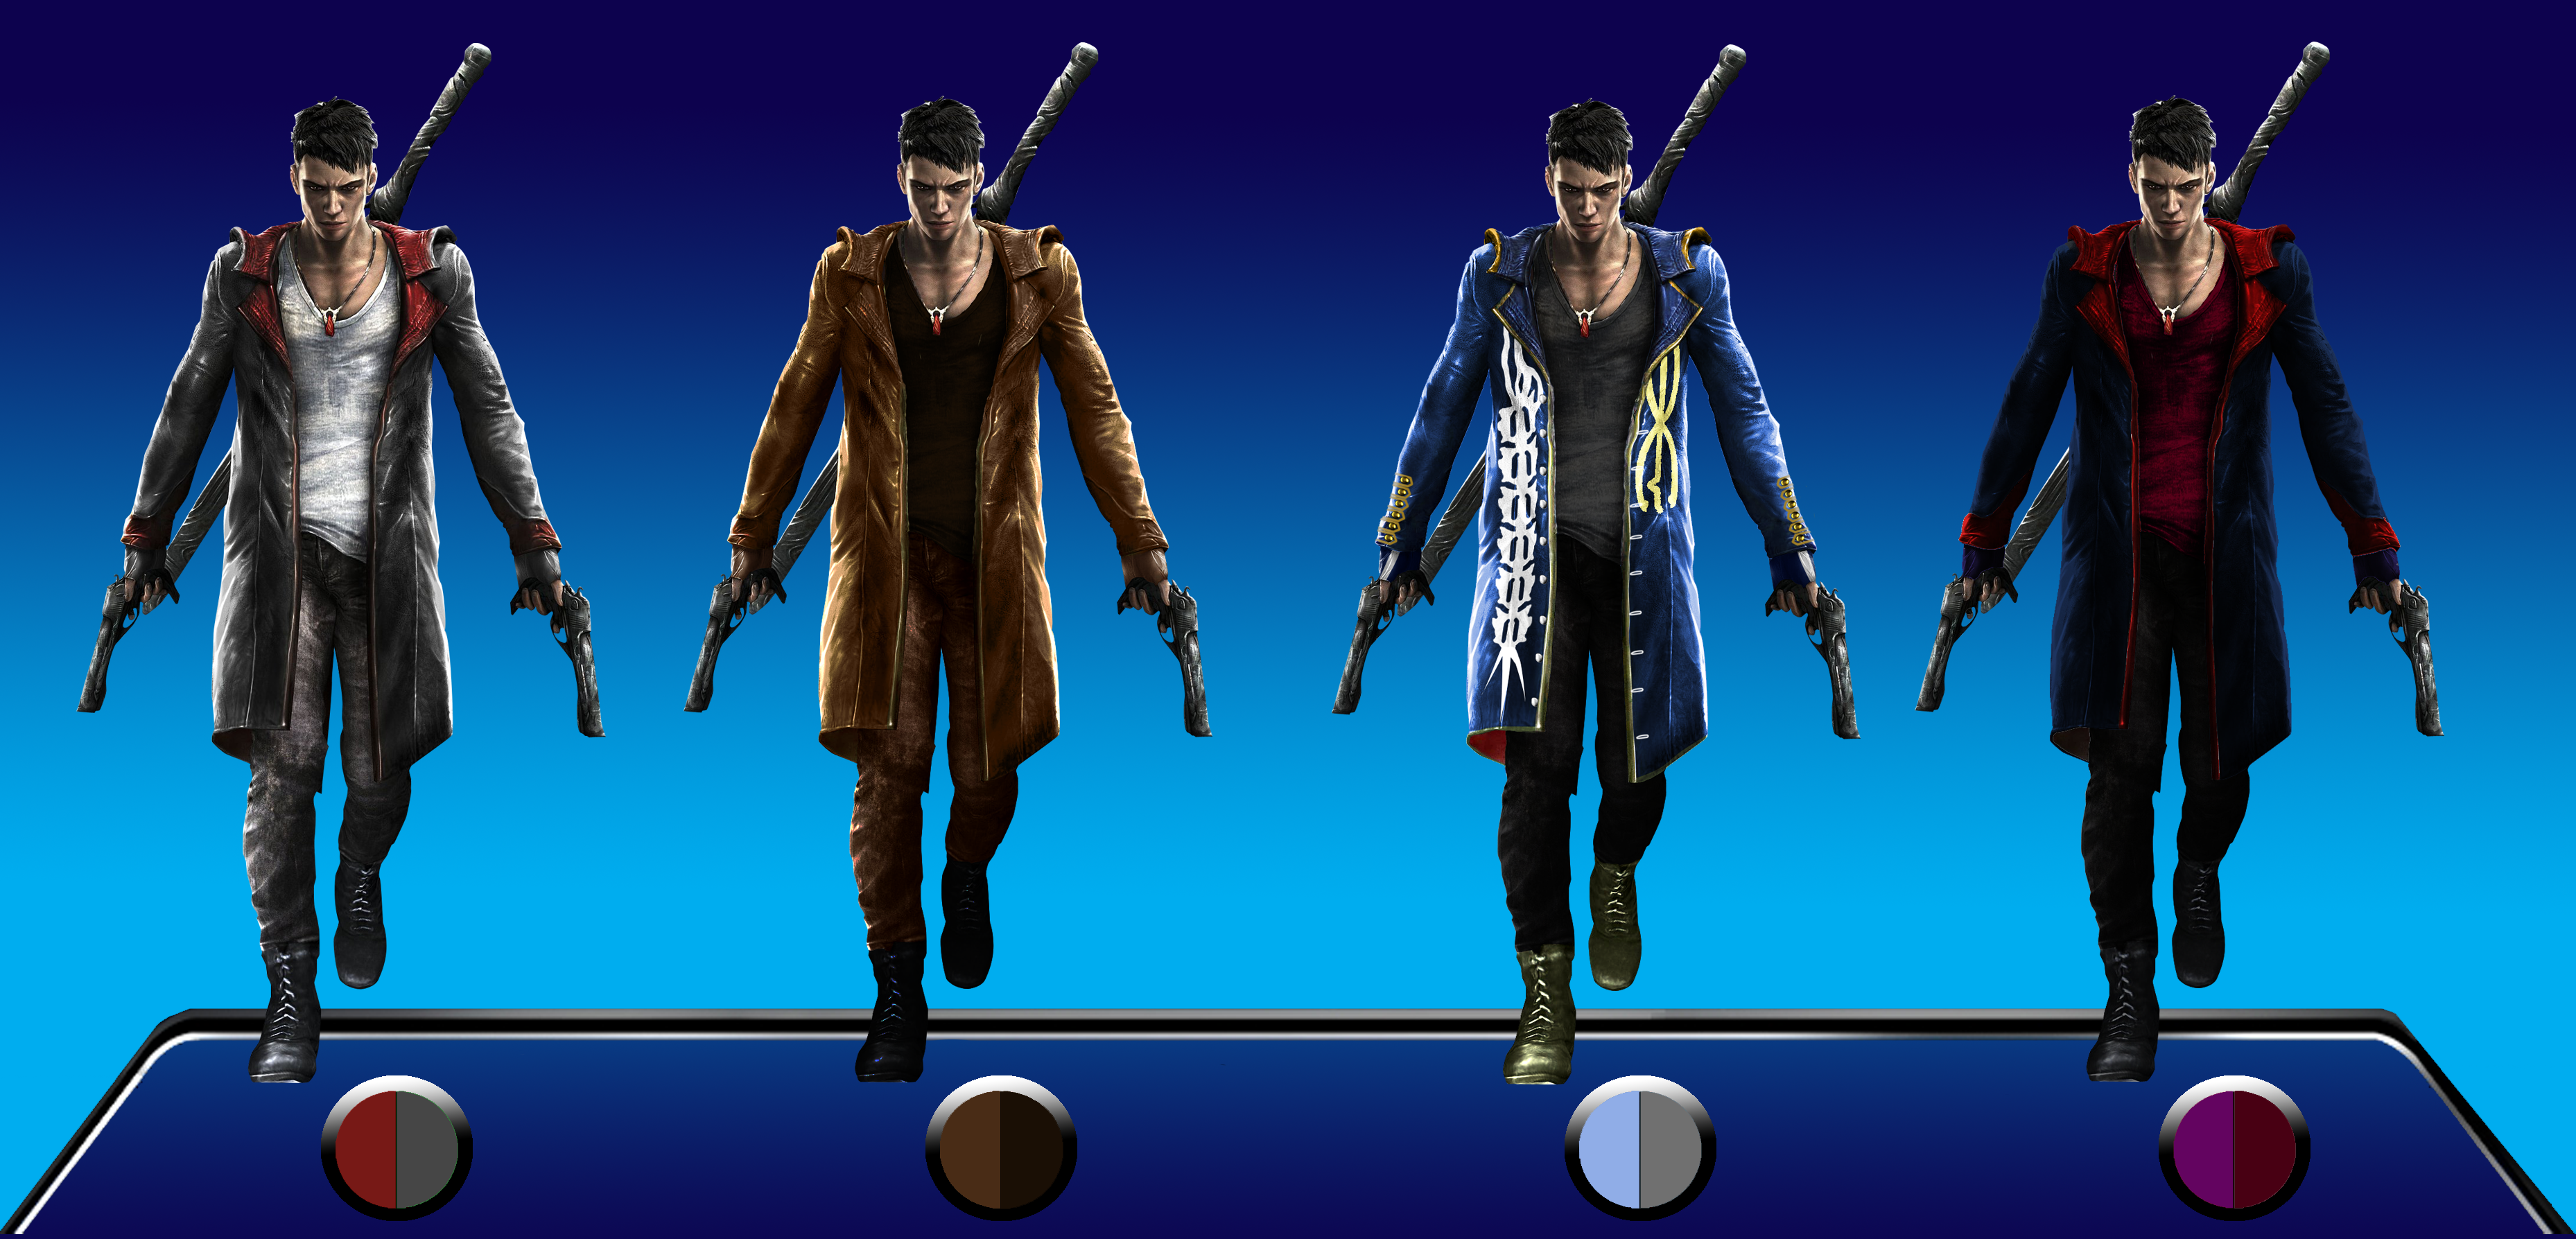 Devil May Cry 2 Costume - Tank Version